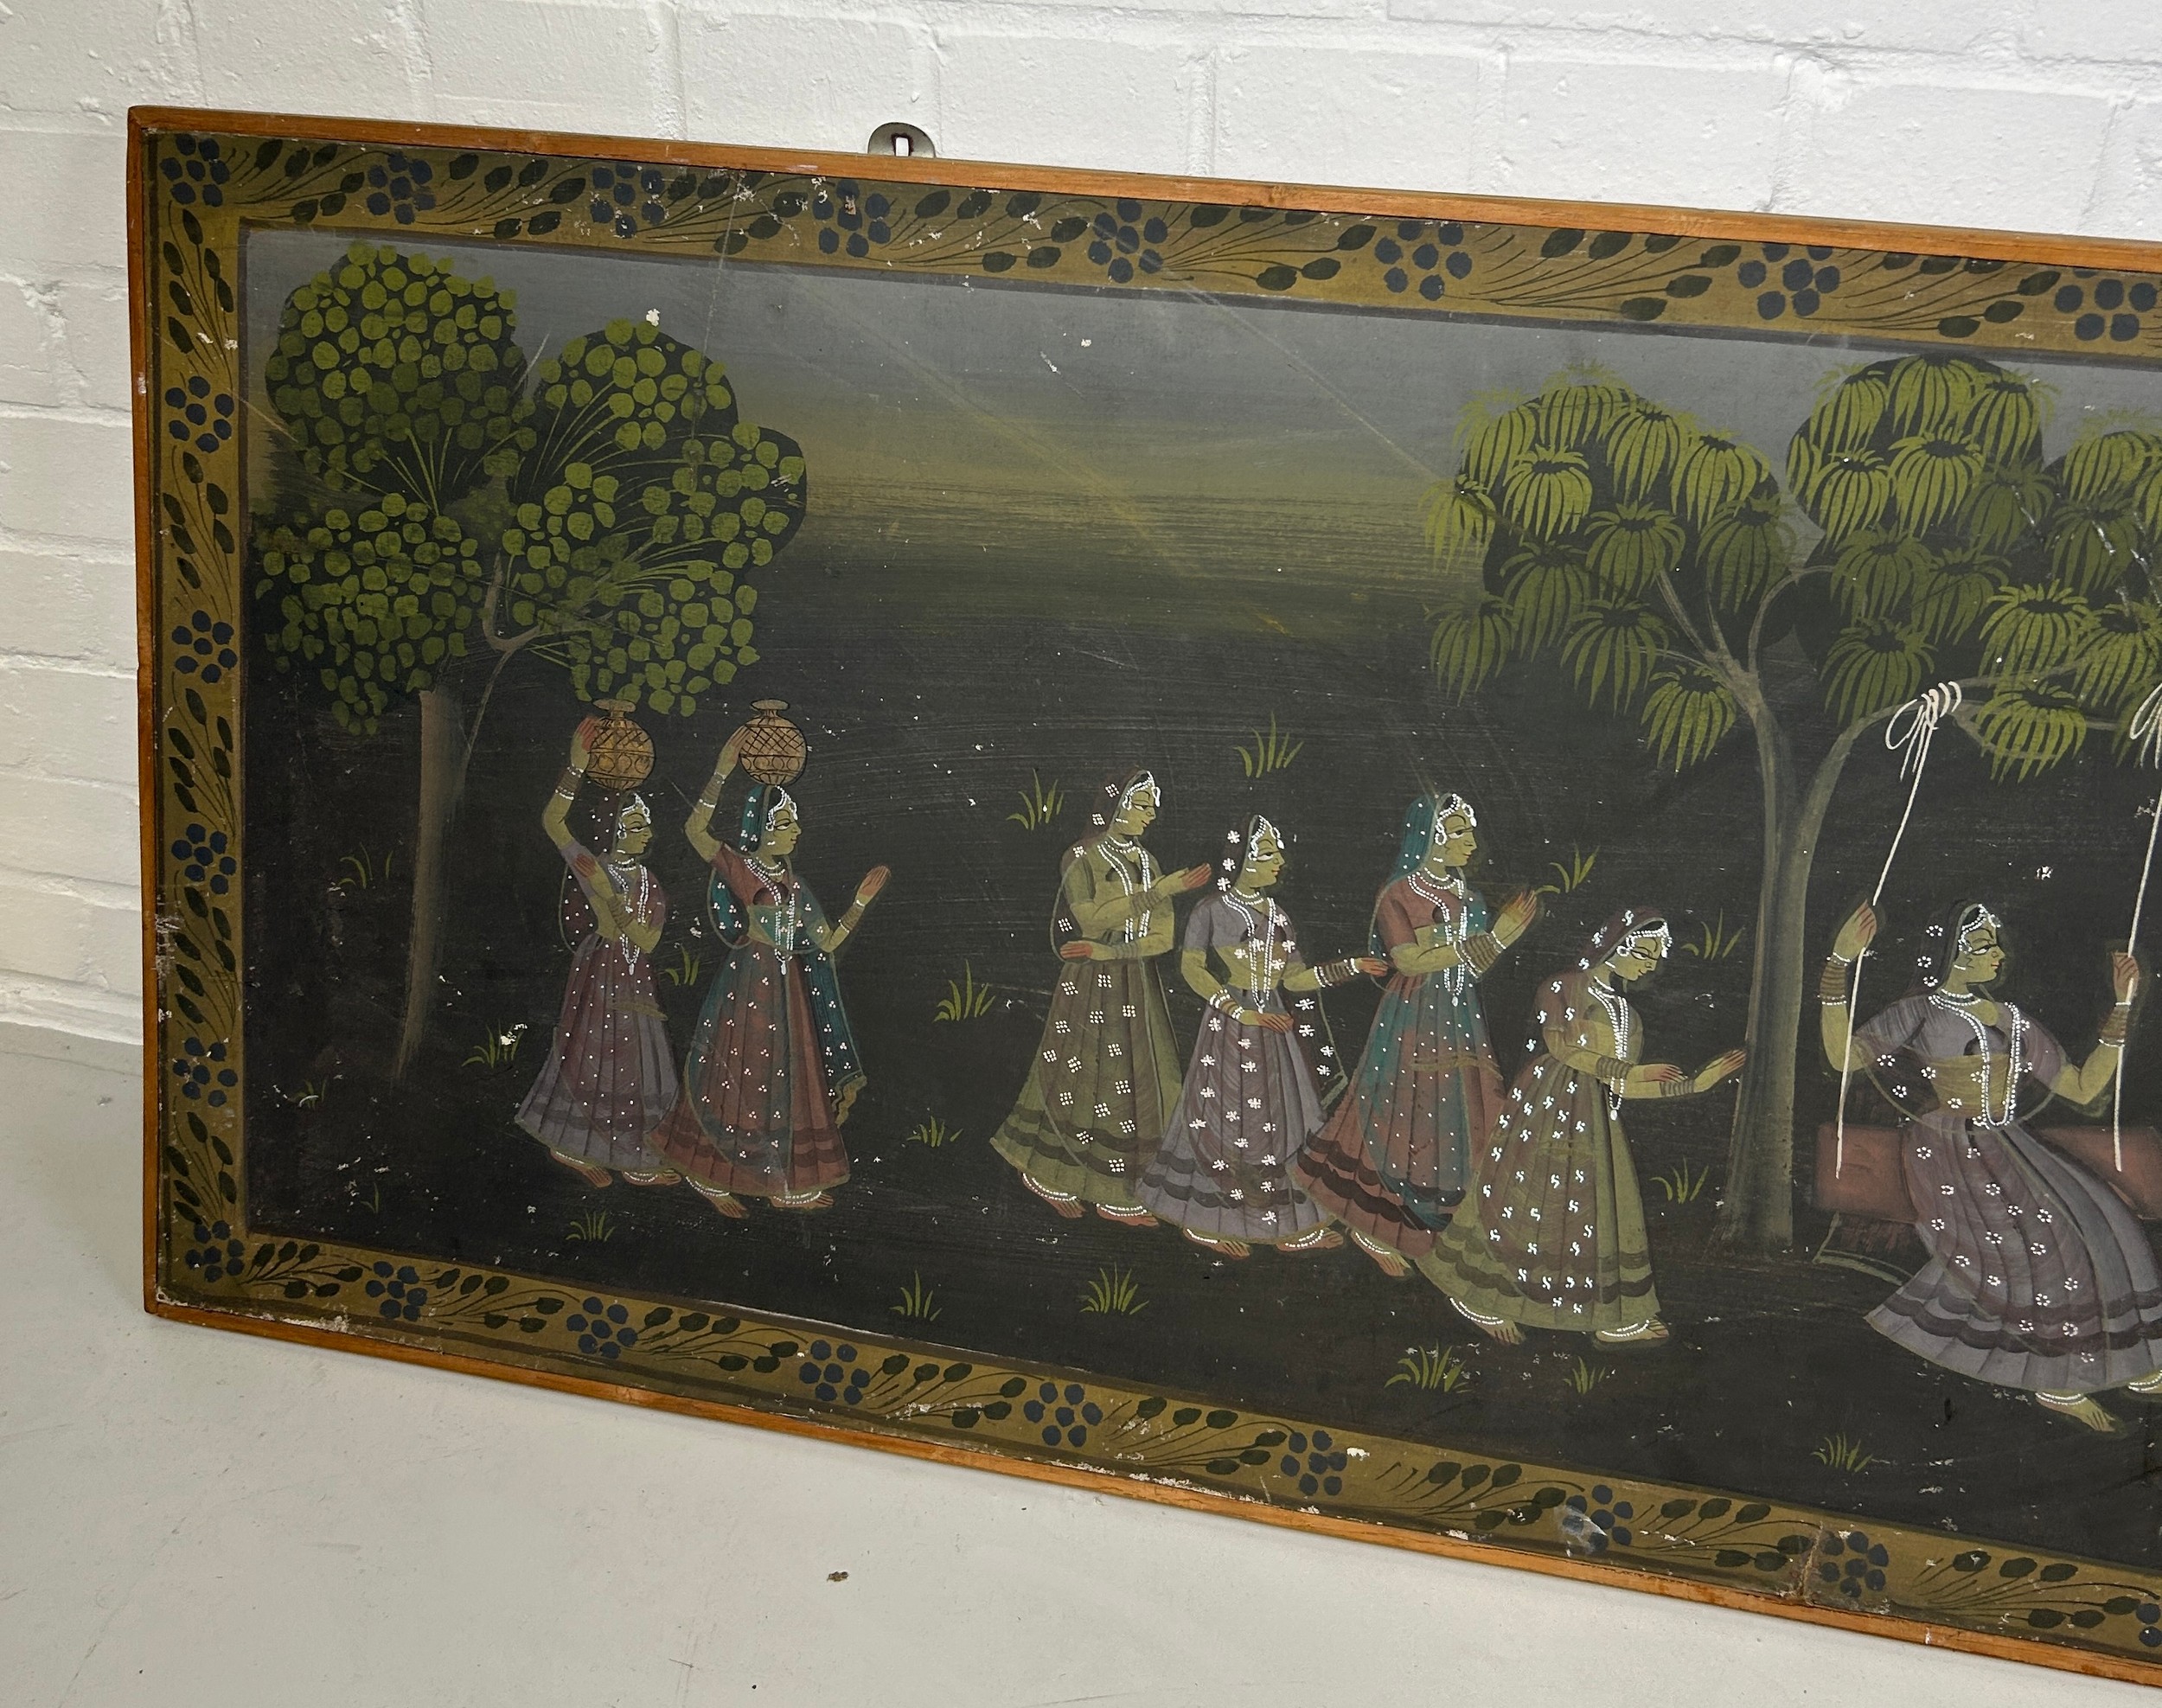 A LARGE INDIAN PAINTING ON LINEN 182cm x 59cm - Image 4 of 4